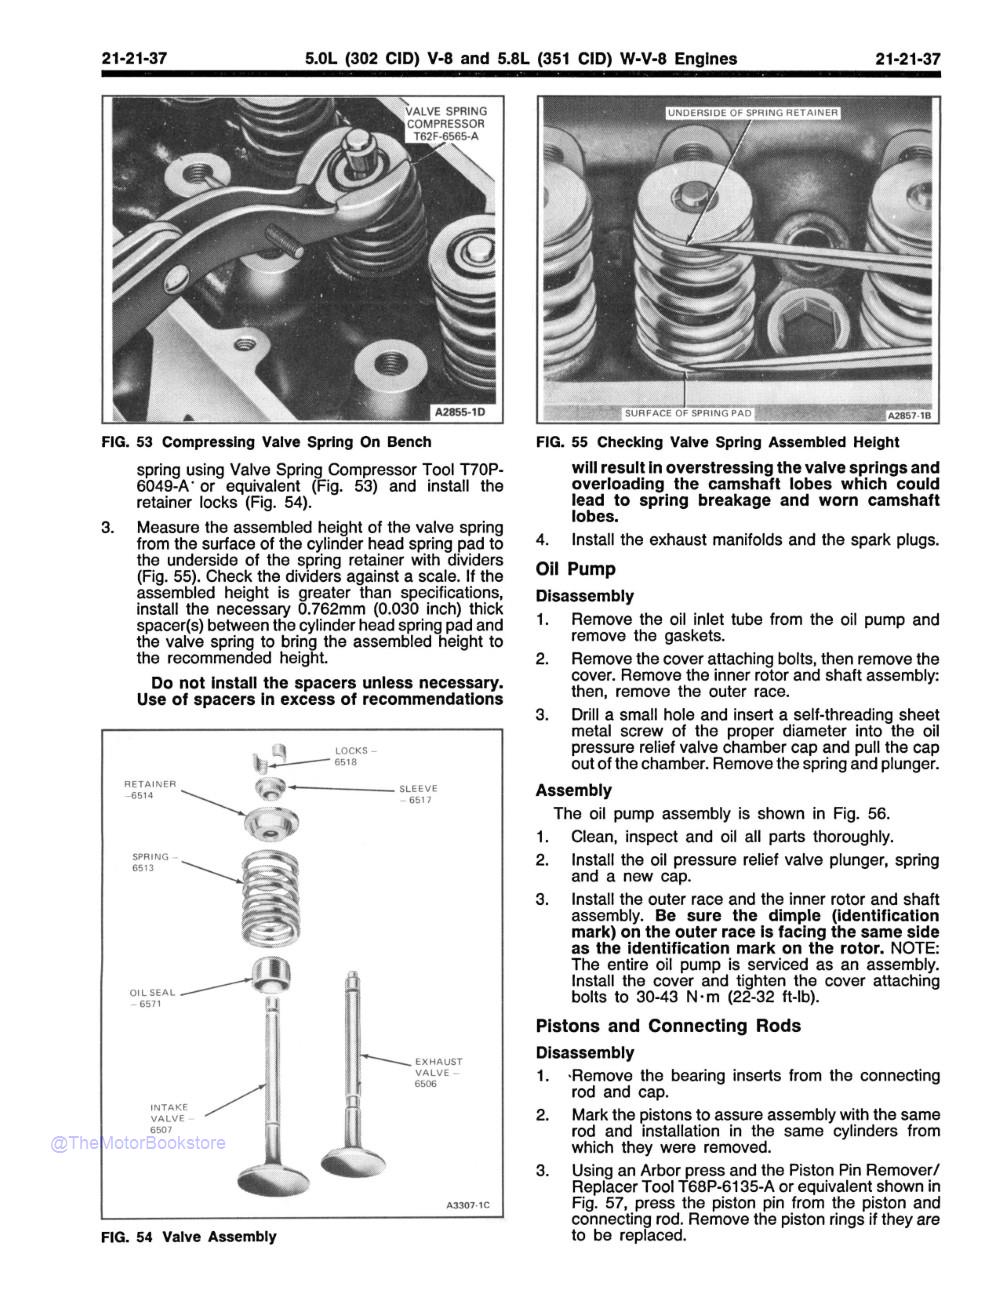 1986 Ford Truck F-150-350, E-150-350 Vans & Bronco Shop Manuals - Sample Page 2